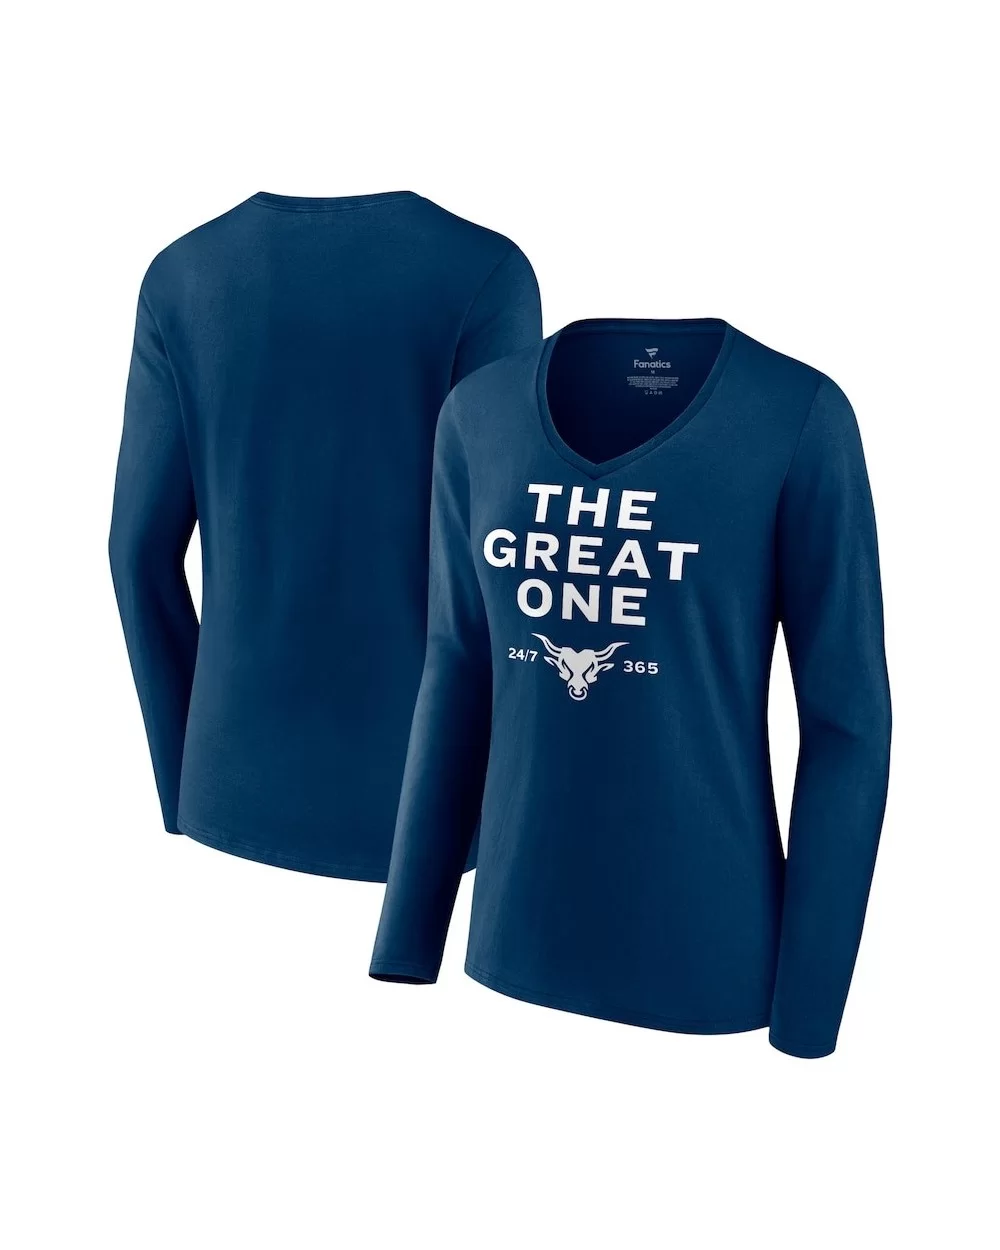 Women's Fanatics Branded Navy The Rock The Great One V-Neck Long Sleeve T-Shirt $9.80 T-Shirts